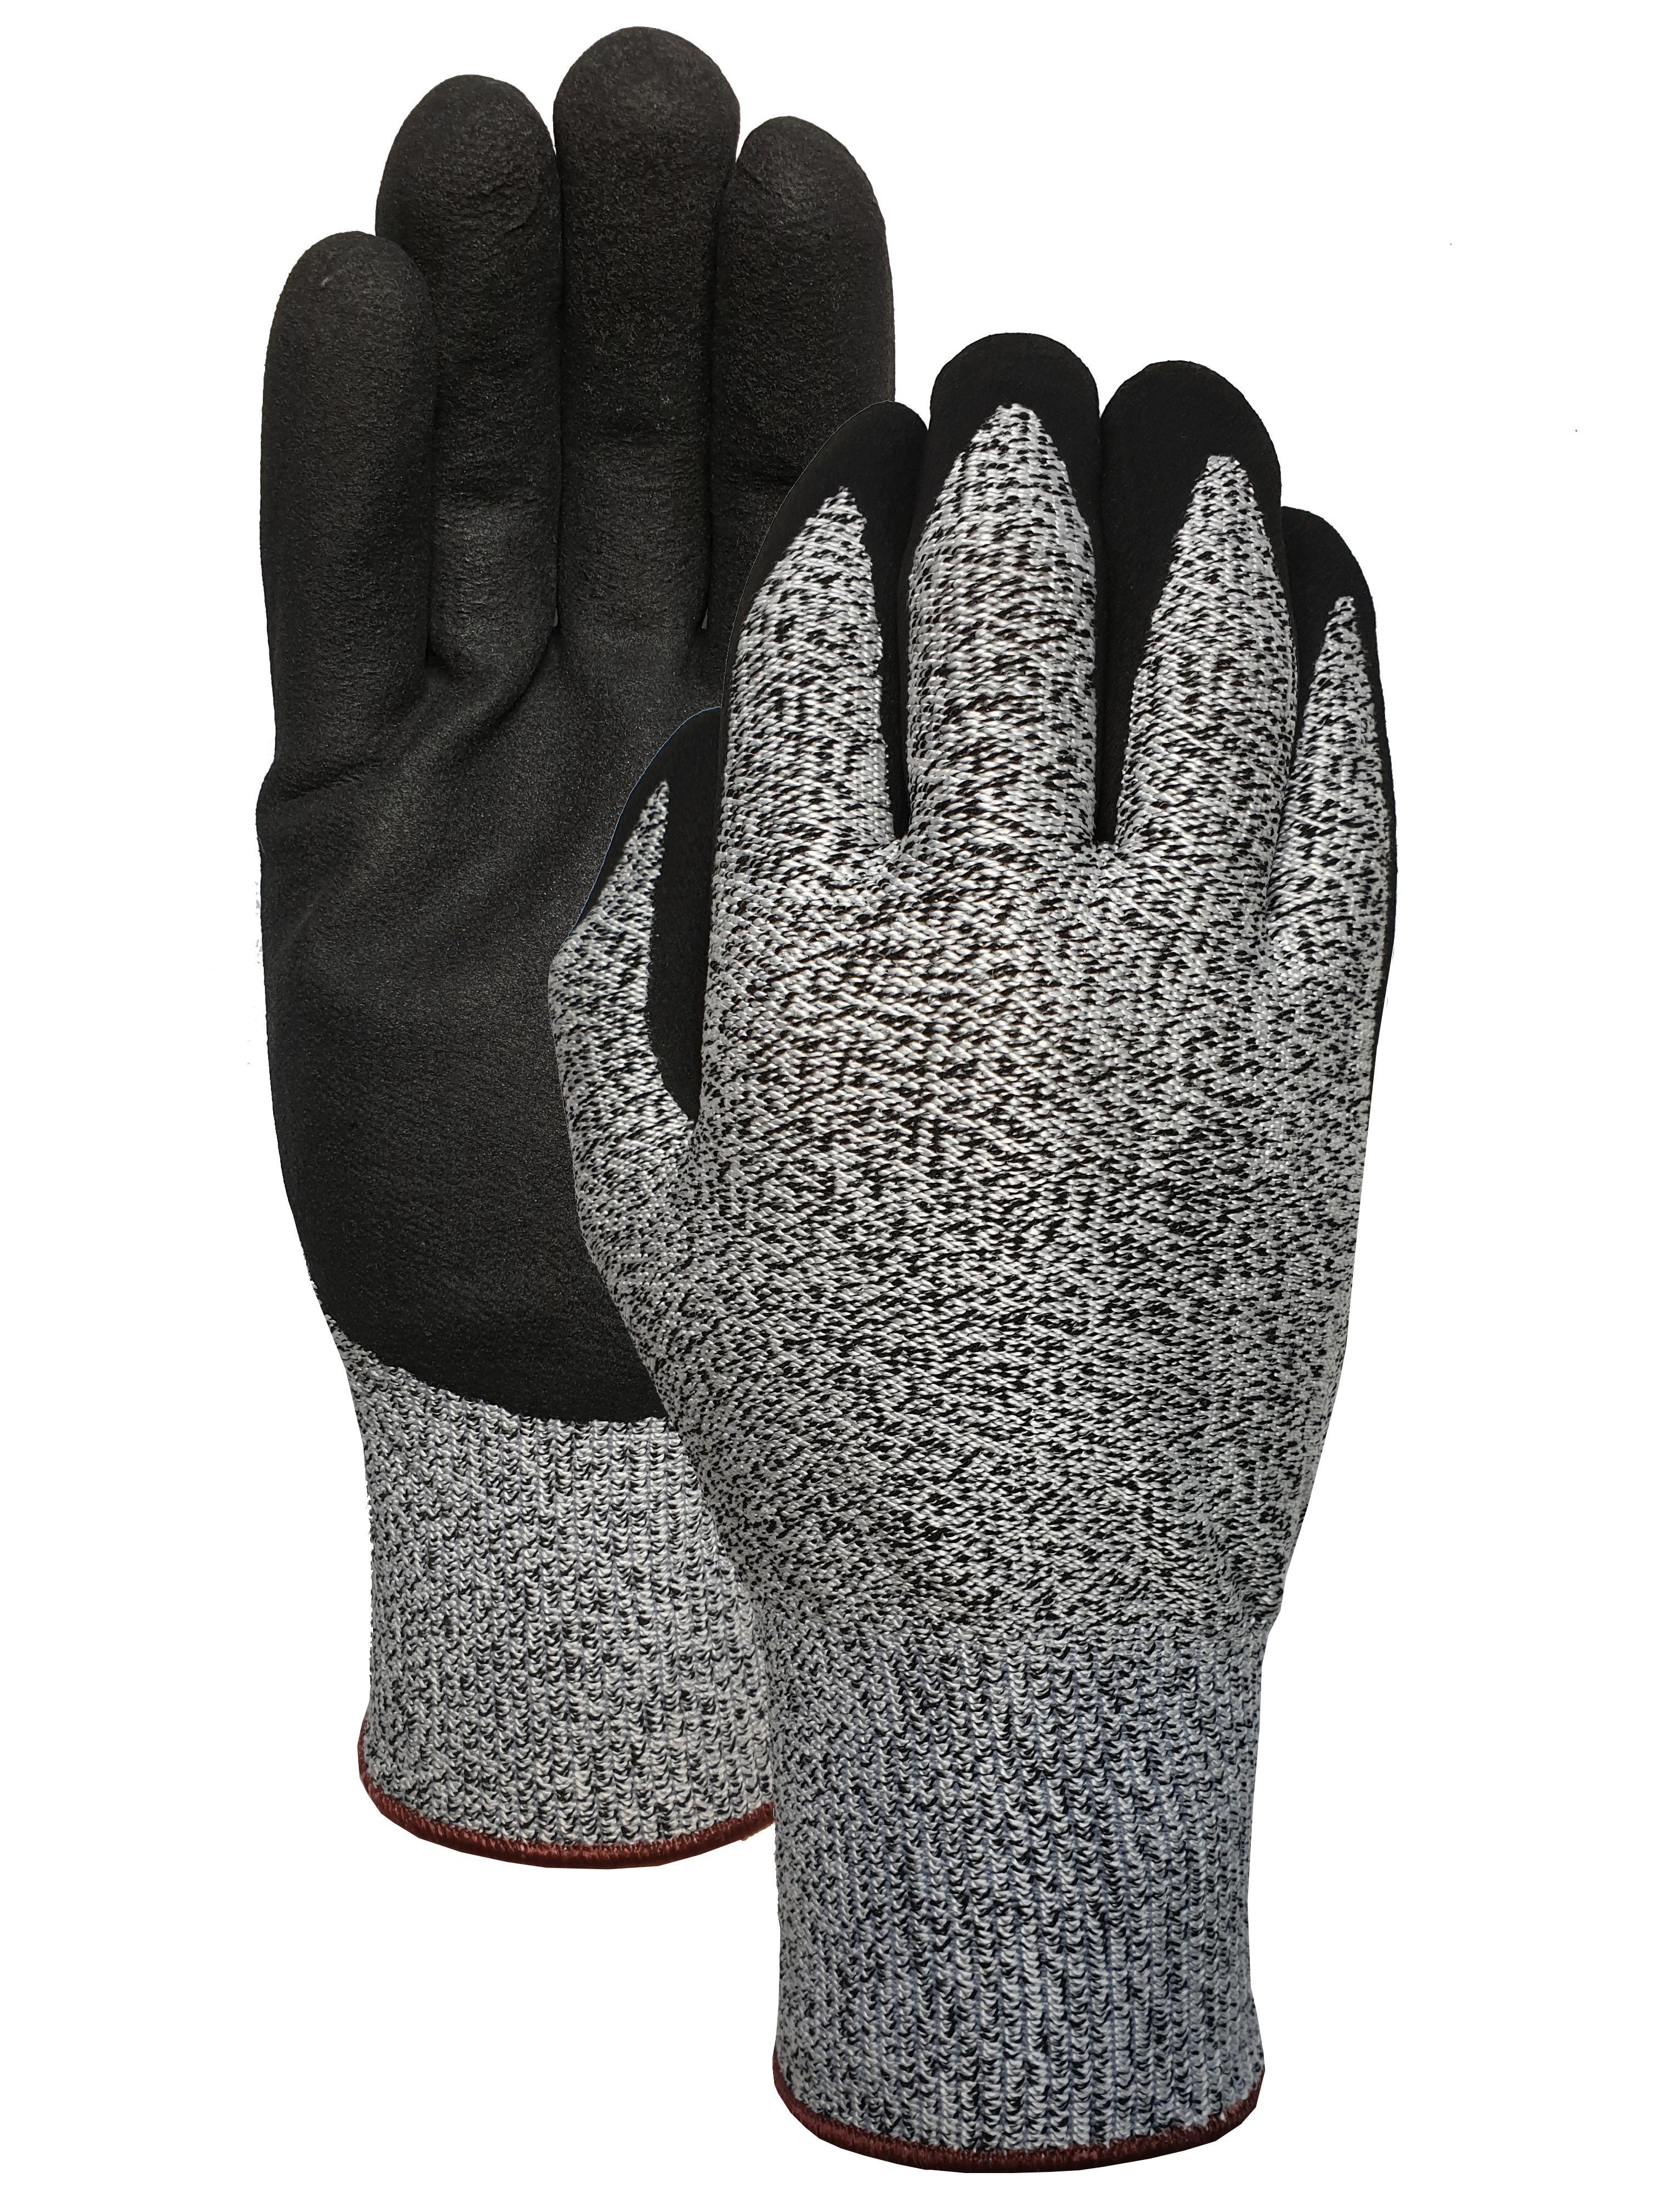 CUT 3 Black speckled with water based PU sandy finish glove